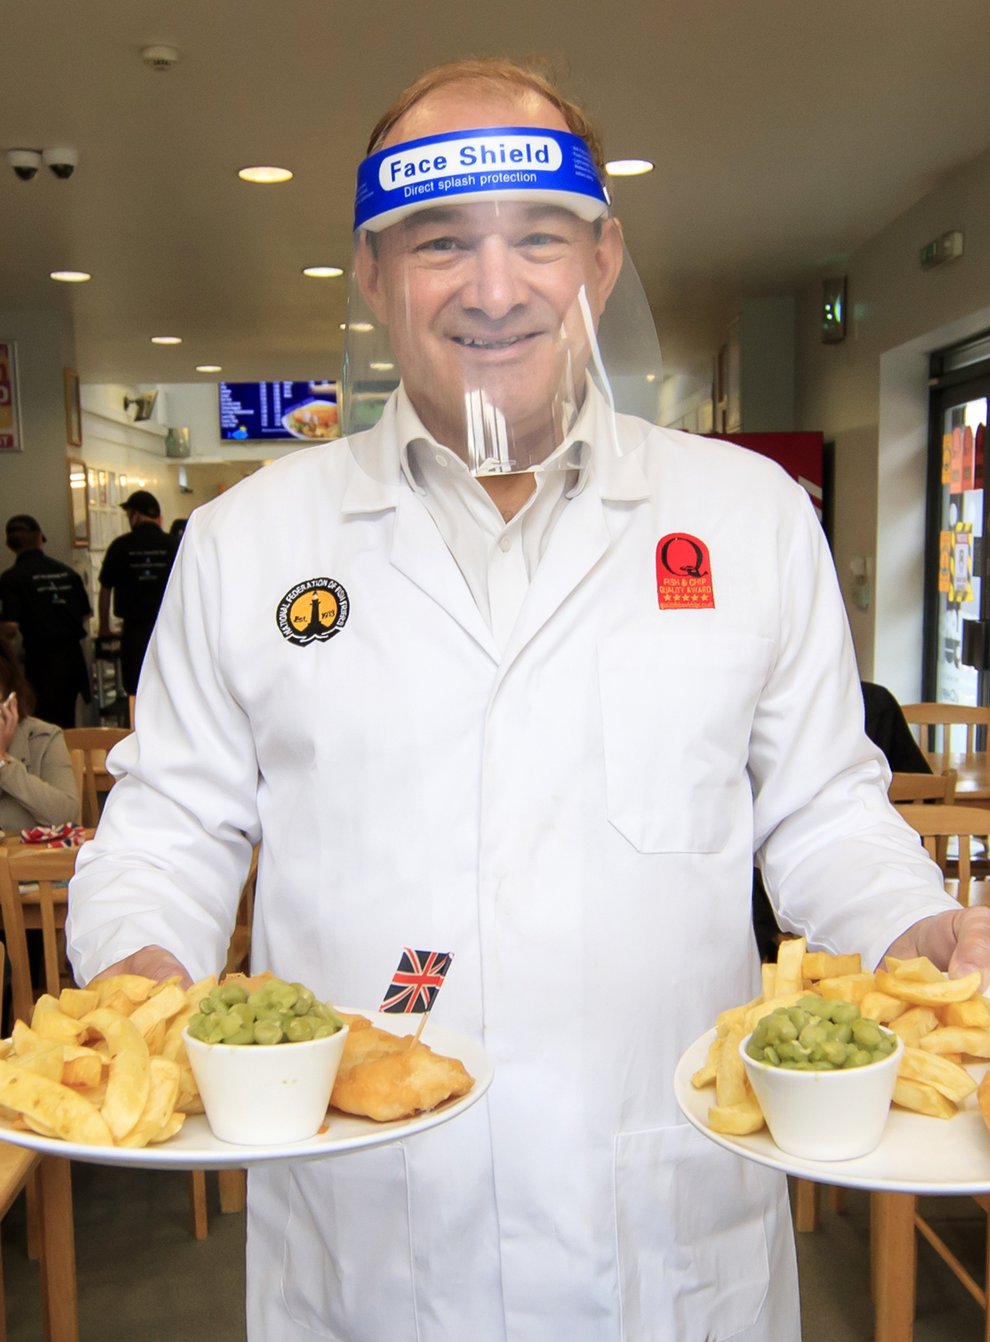 Sir Ed Davey puts in a shift at Taylors fish and chip shop in Stockport